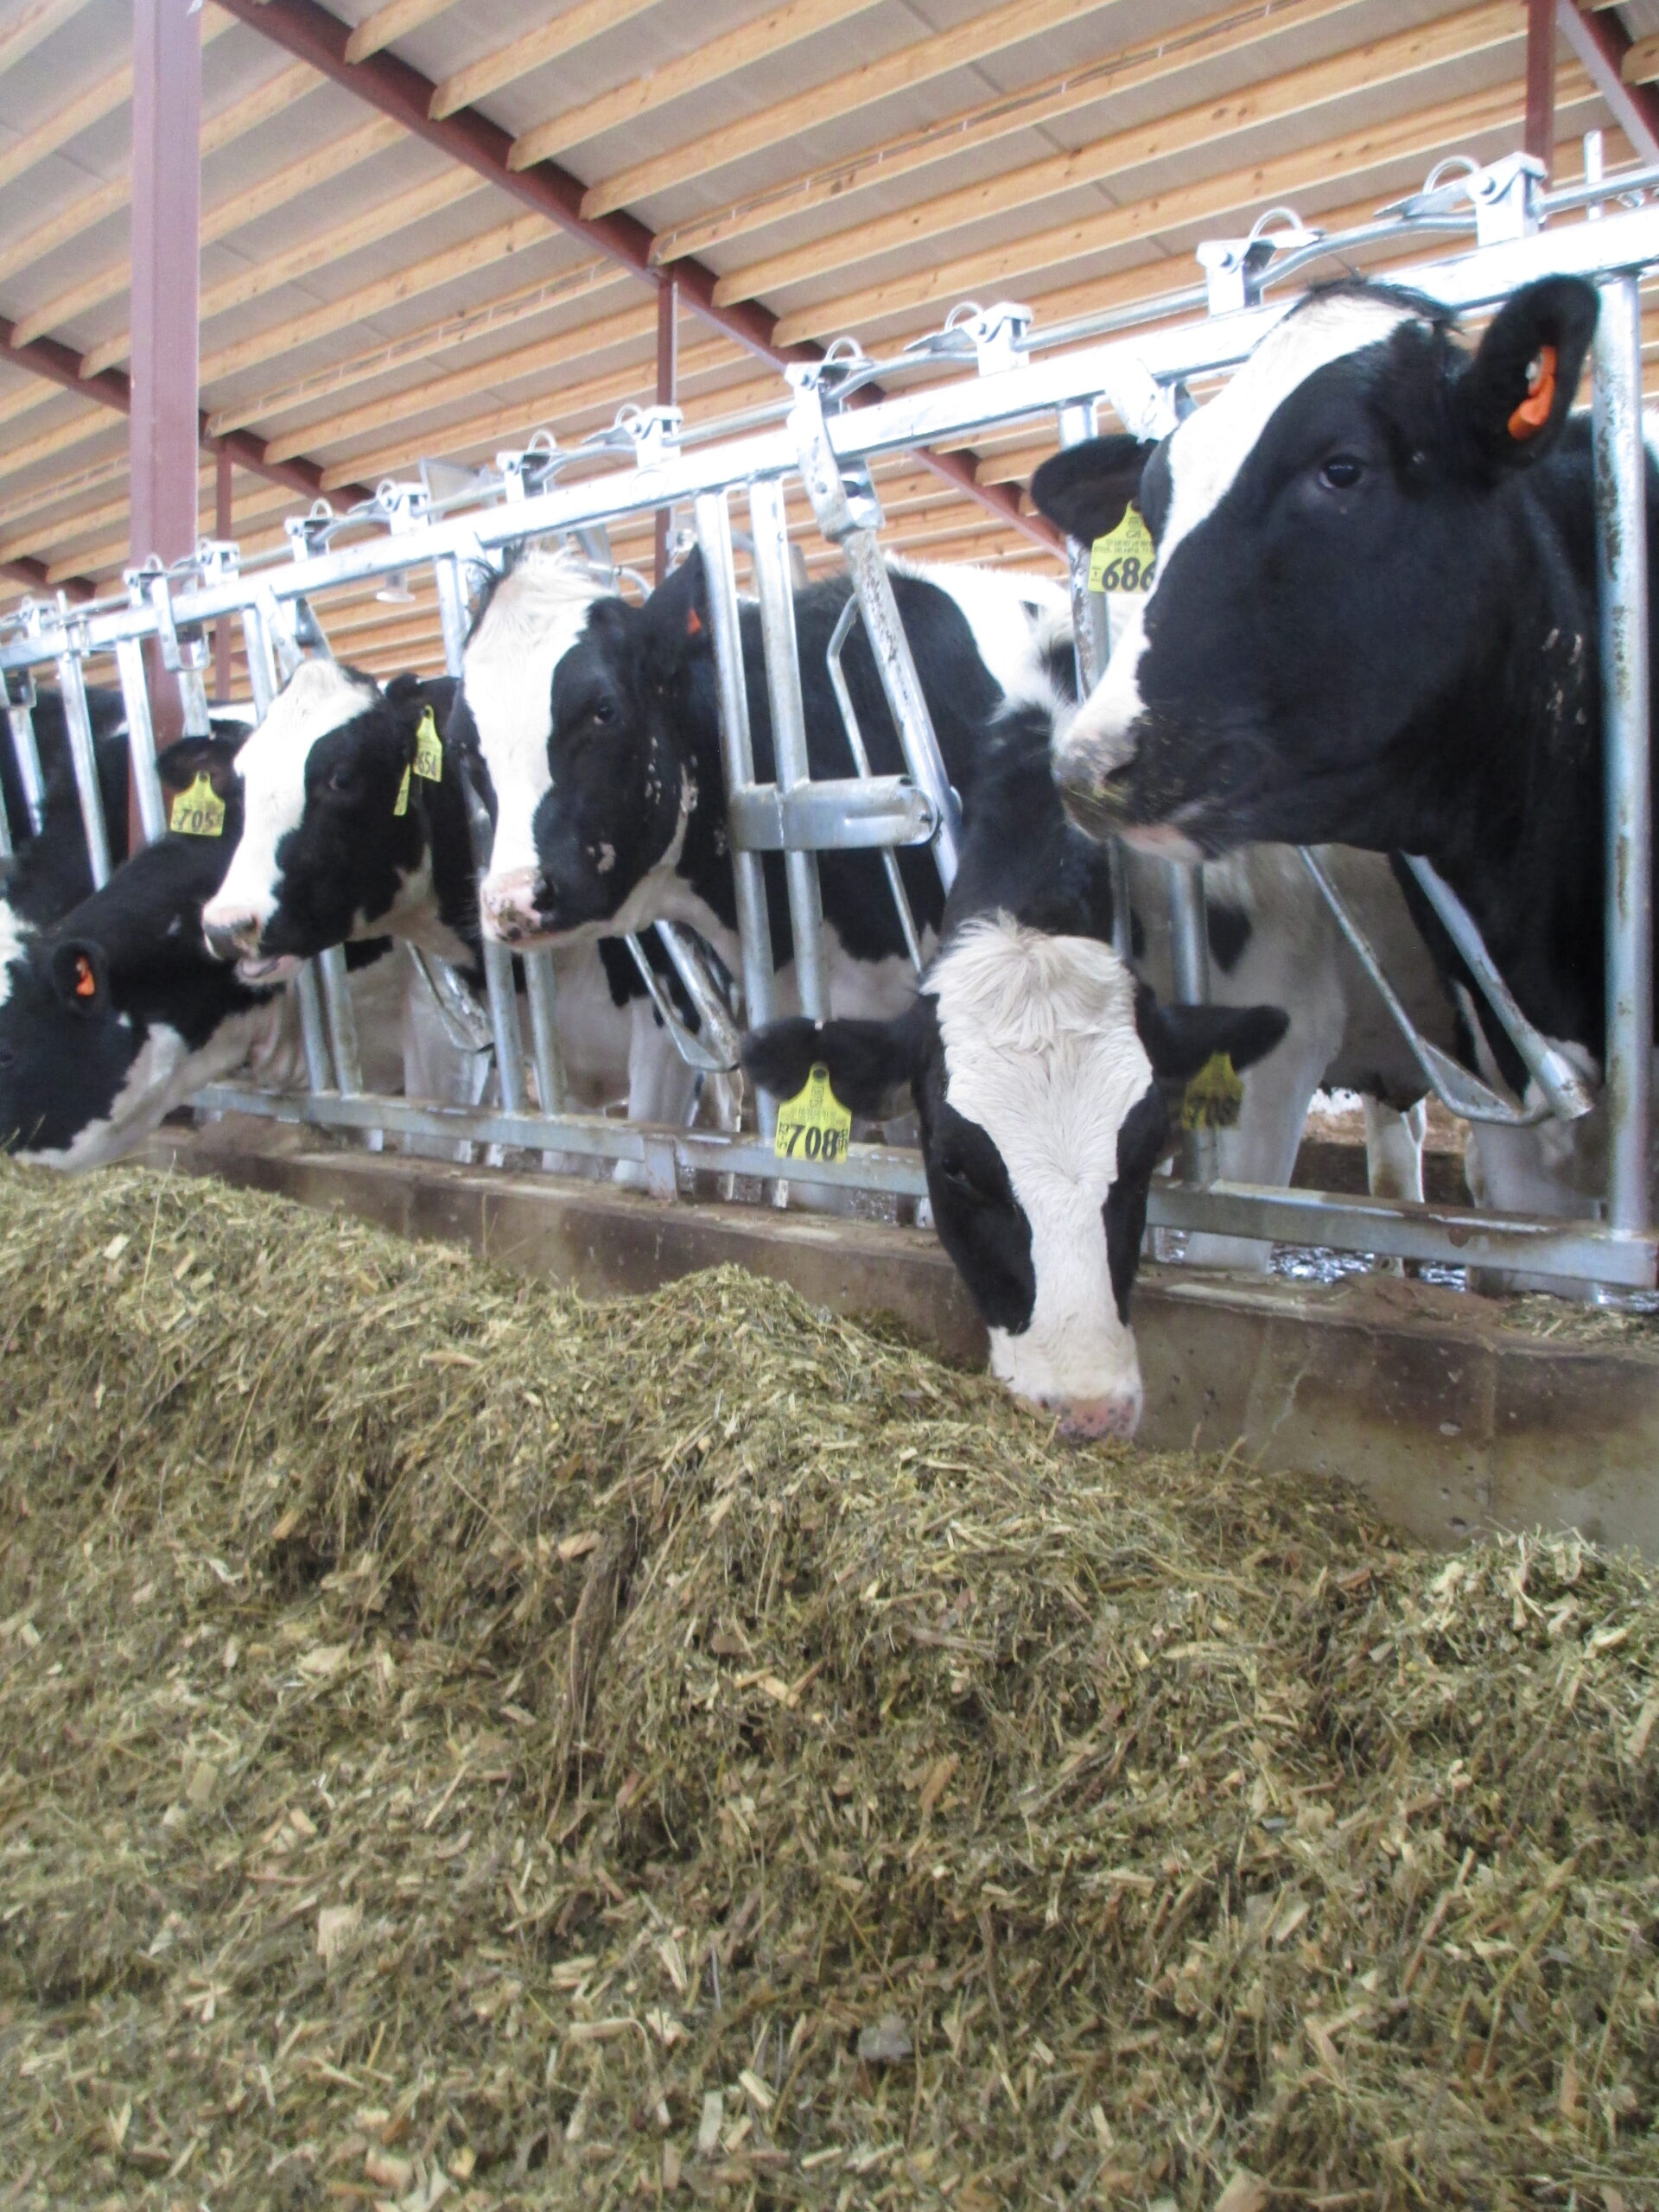 Dairy cows eating silage